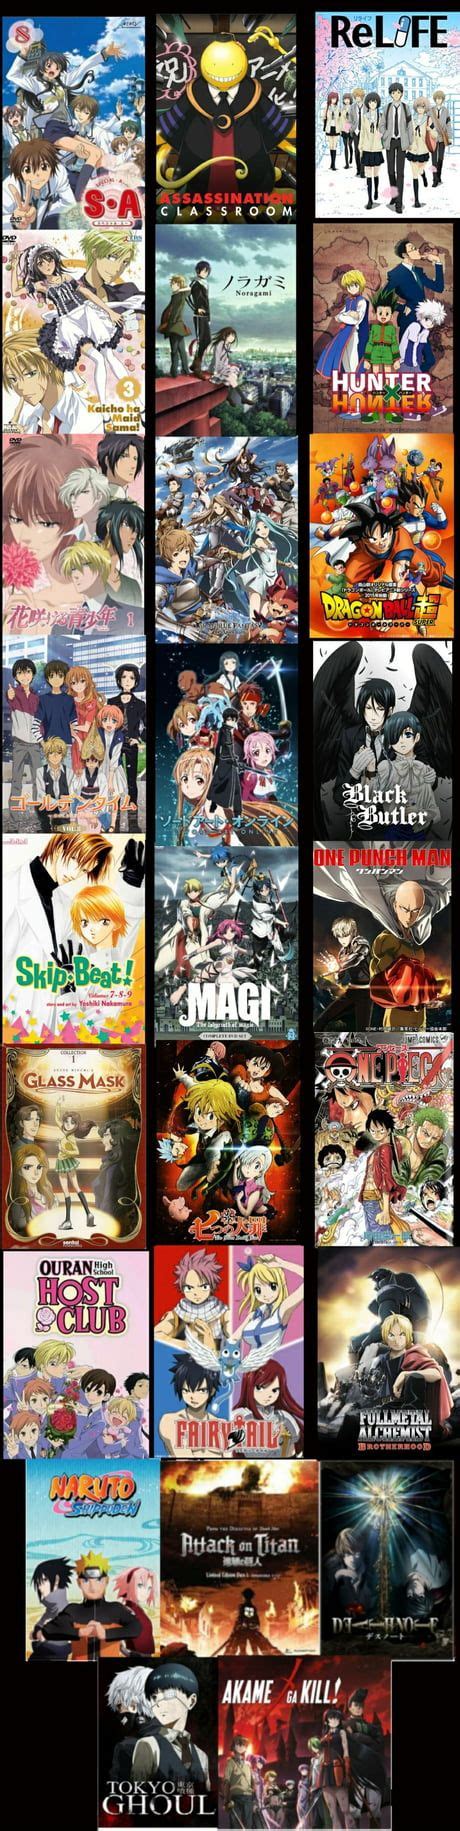 Many Different Anime Posters Are Shown Together